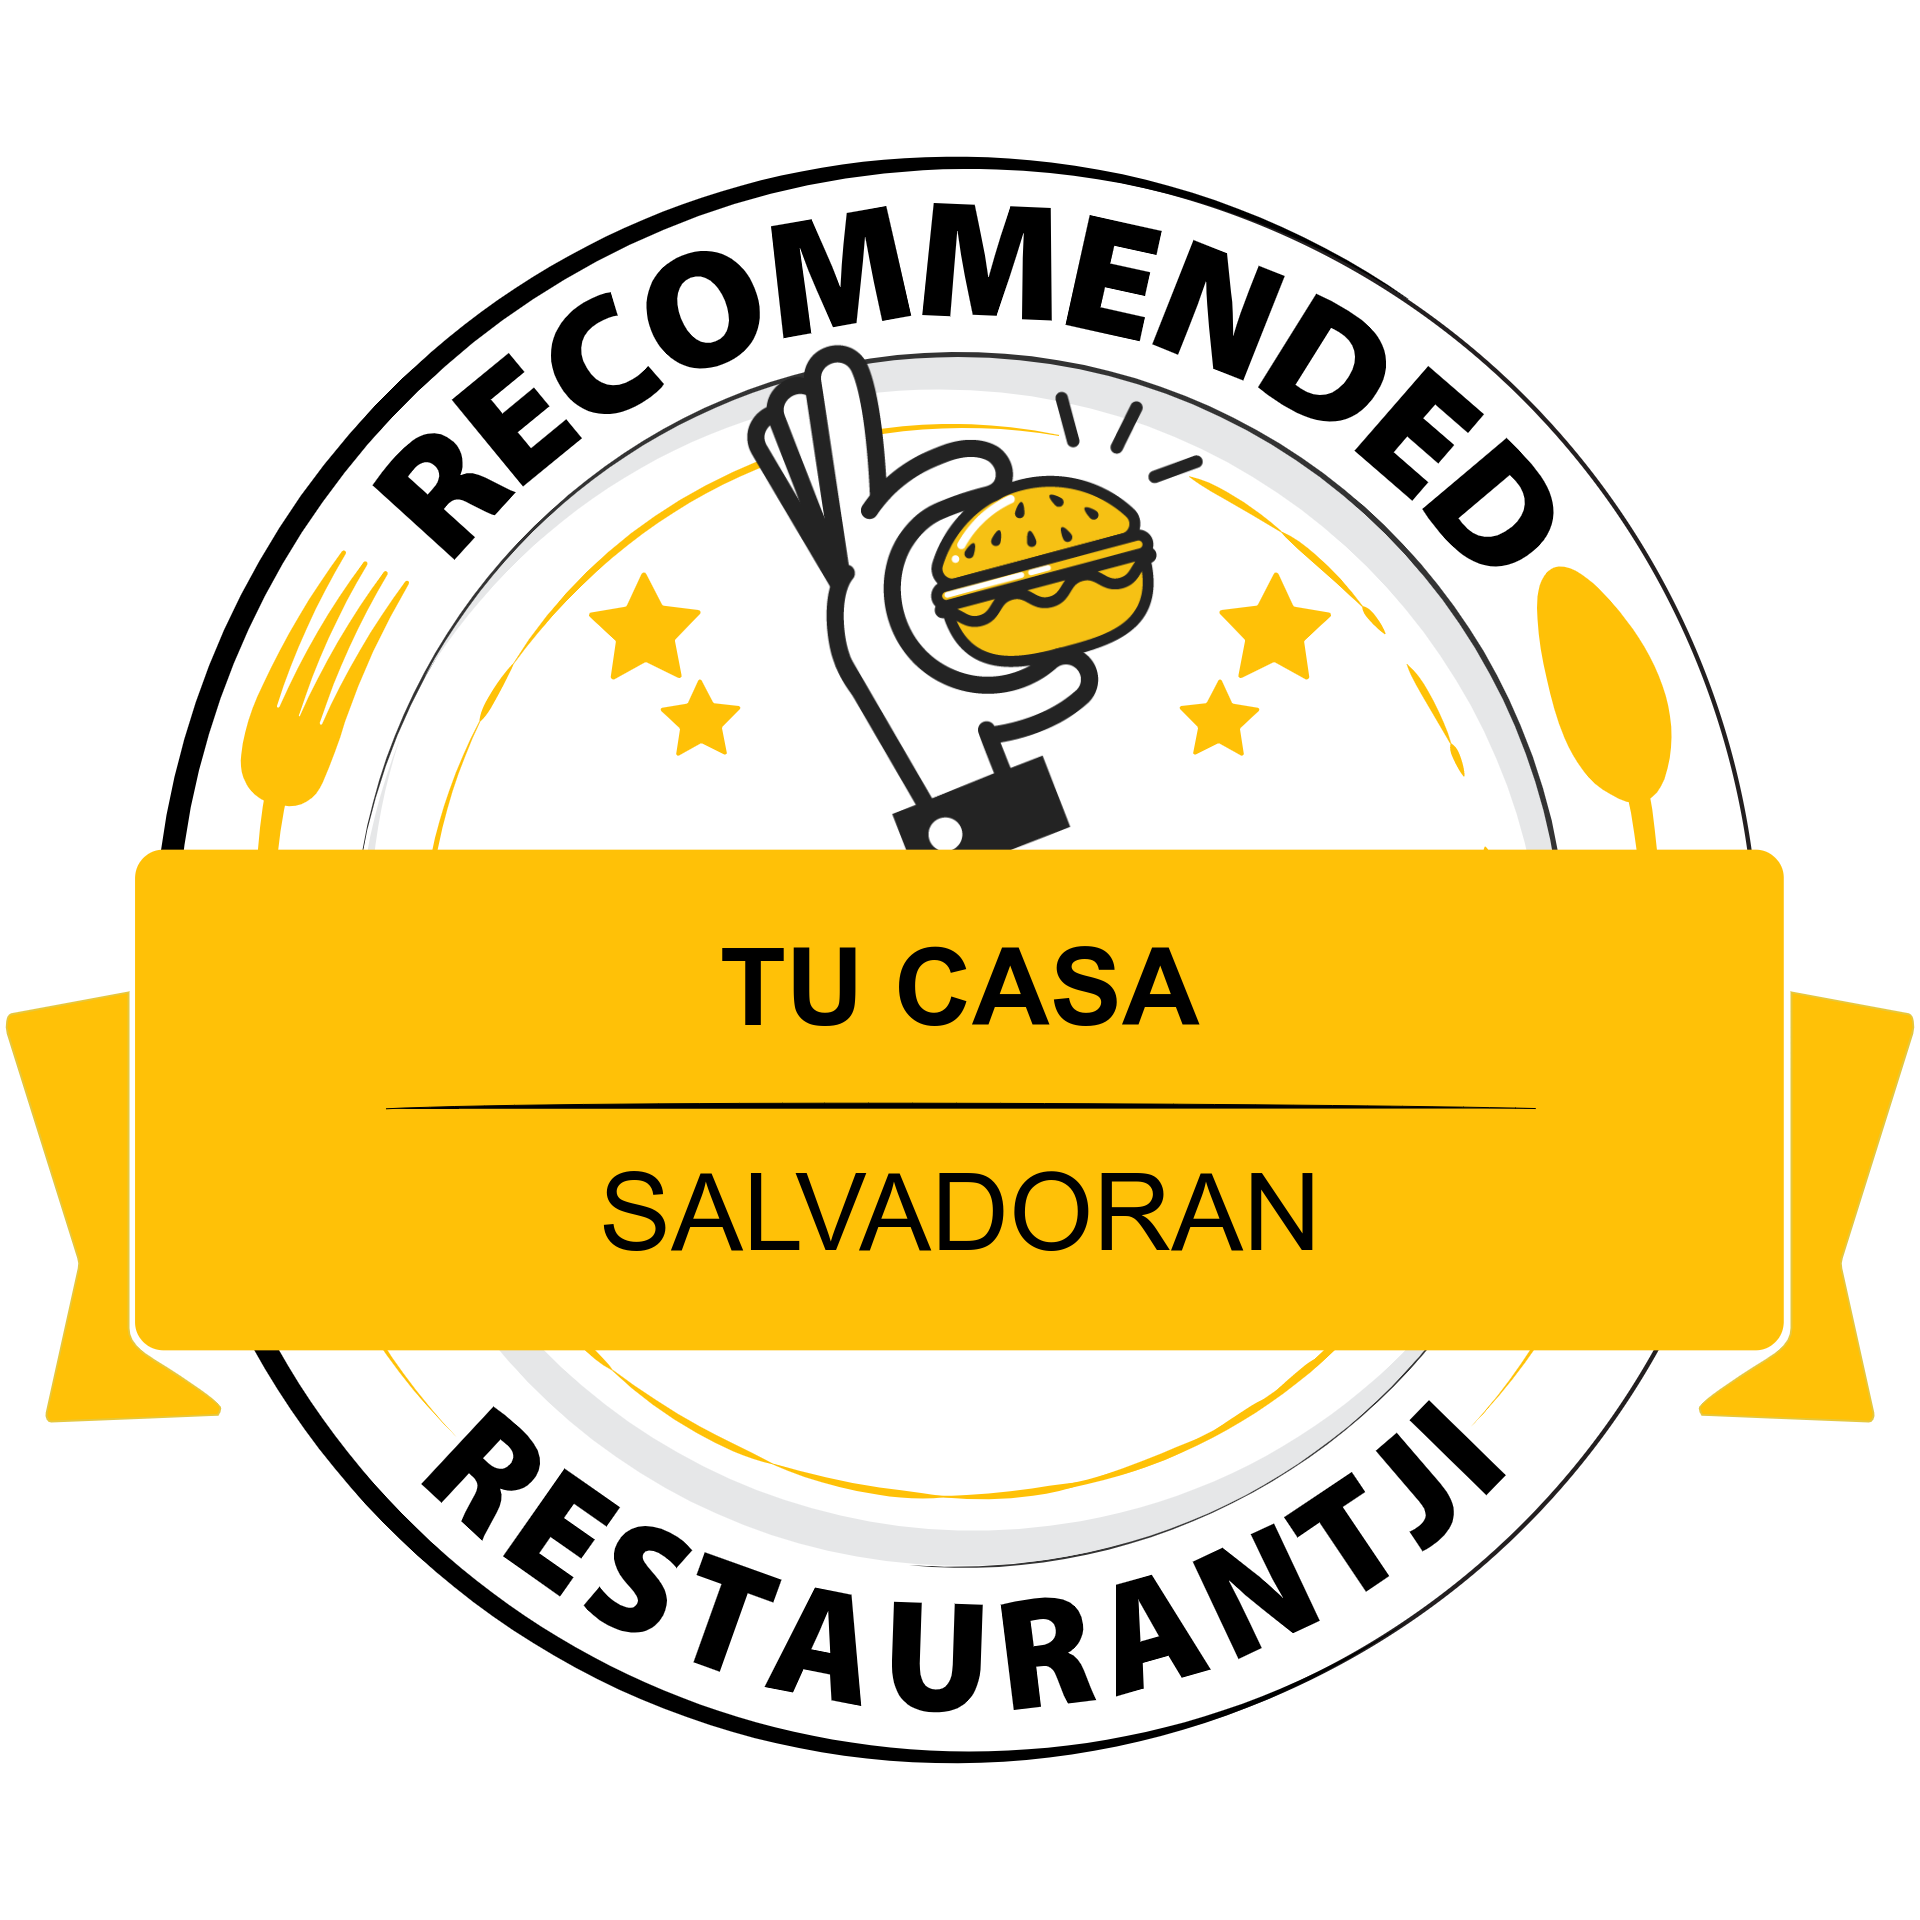 Tu Casa is a standout choice on Restaurantji - a convenient, all-in-one local dining guide with reviews, menus and photos.